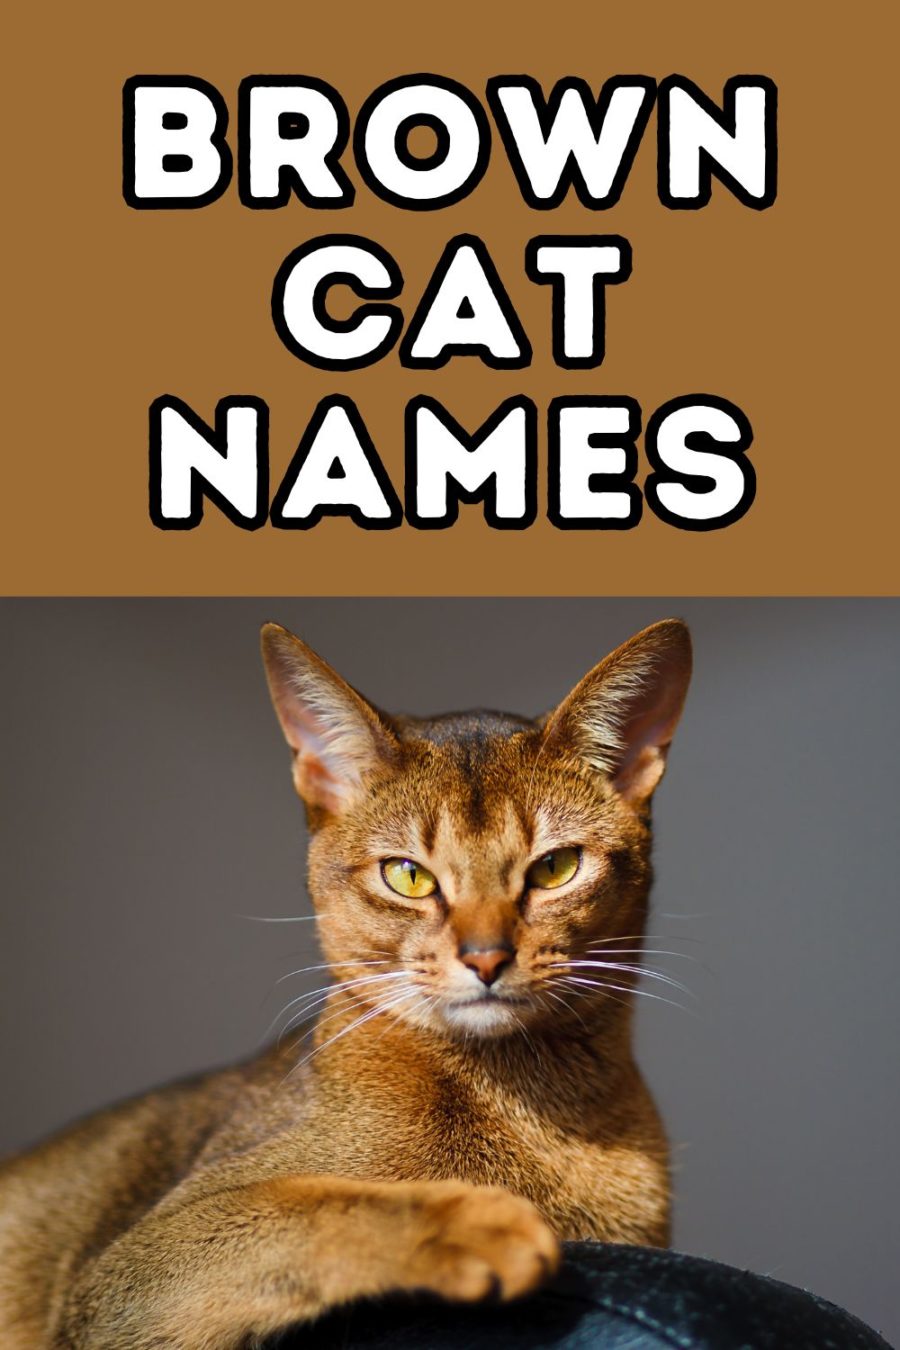 brown cat looking directly at camera in lower half of image; top half of image contains words Brown Cat Names.